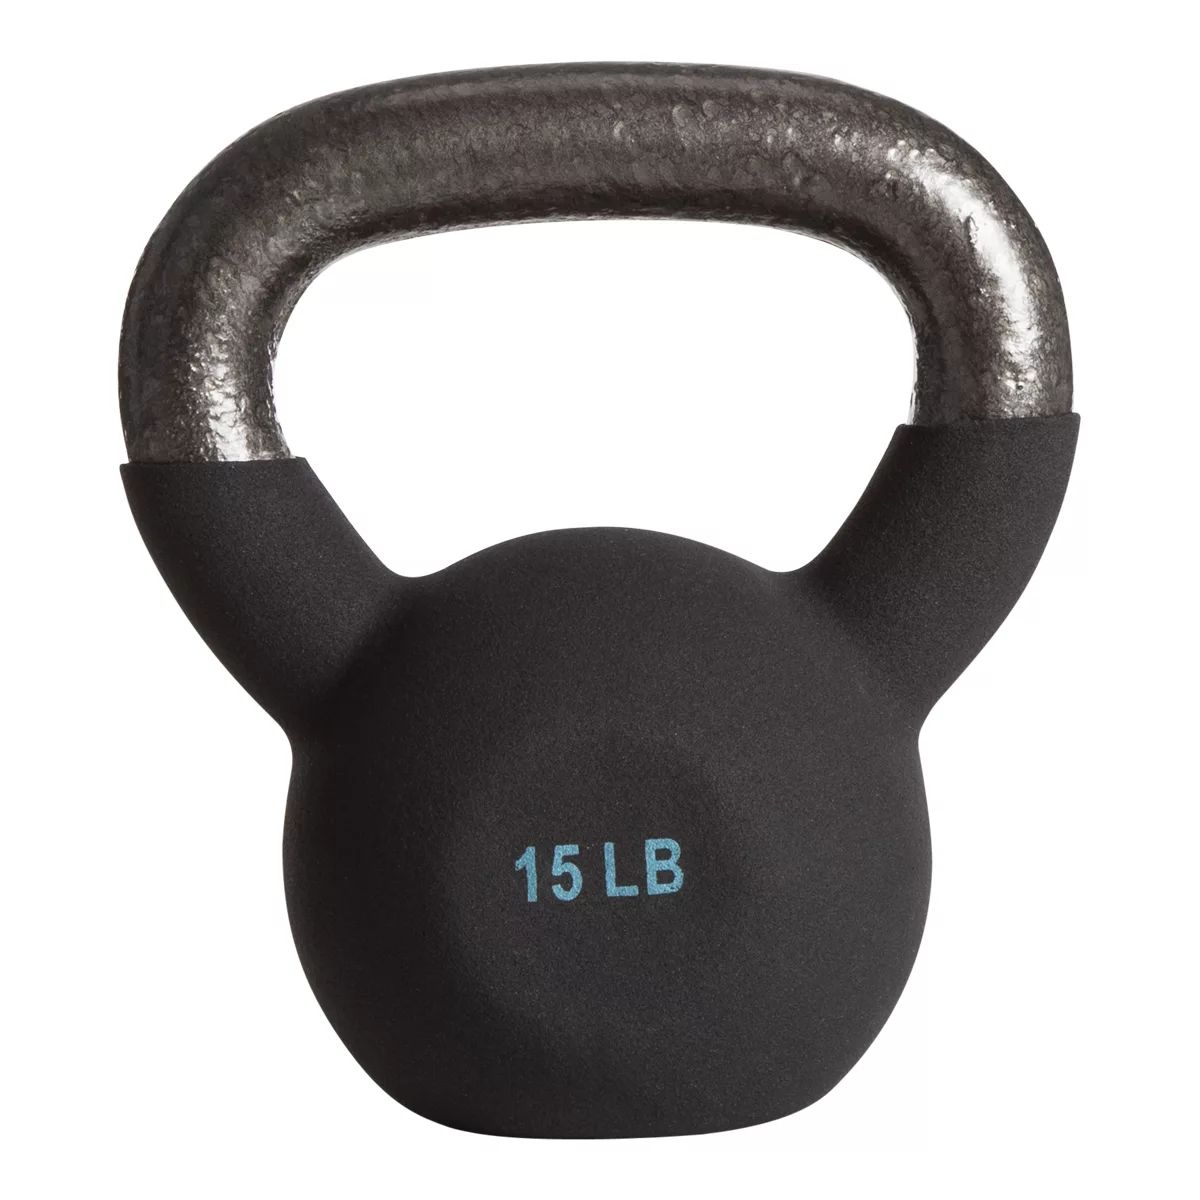 Yaheetech 25lbs Kettlebell Weight w/HDPE Coated & Wide Flat Base, Kettle  bell Weights w/Ergonomic Handle for Home Gym Fitness Workout Bodybuilding